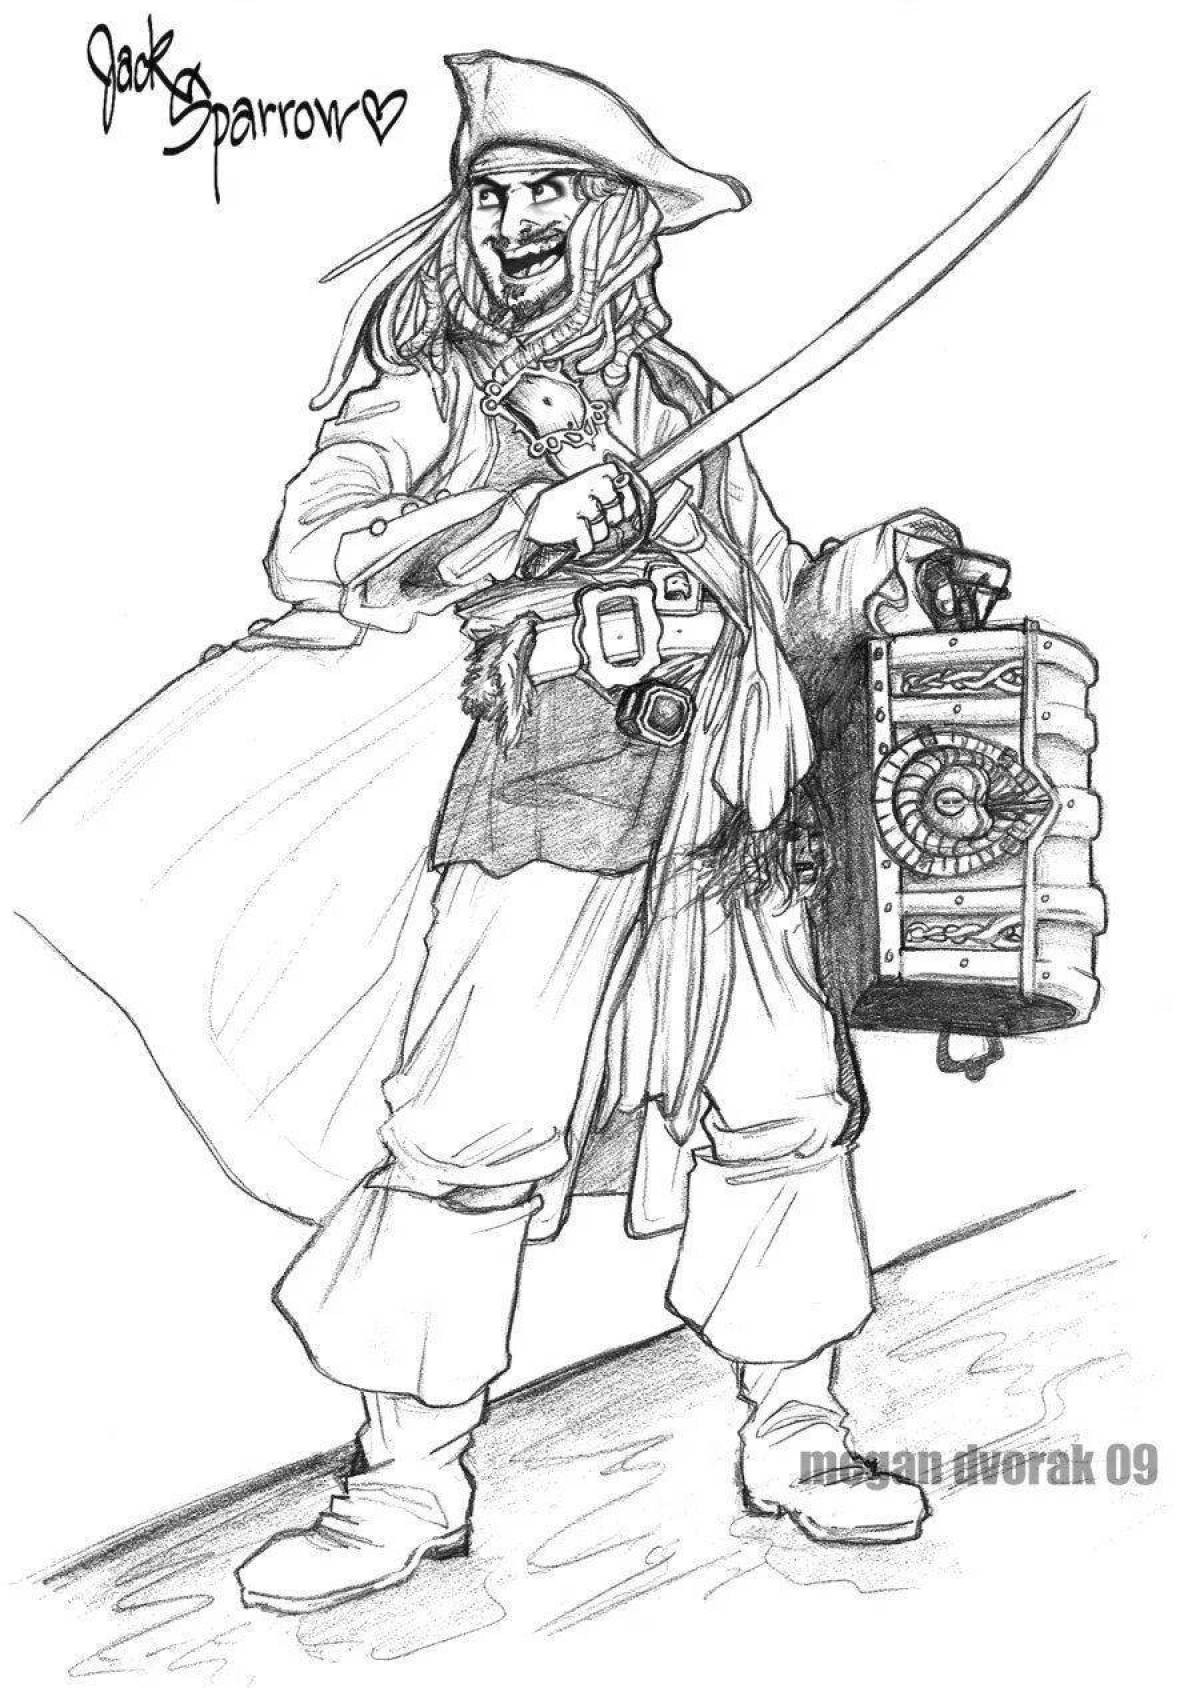 Charming Jack Sparrow coloring page